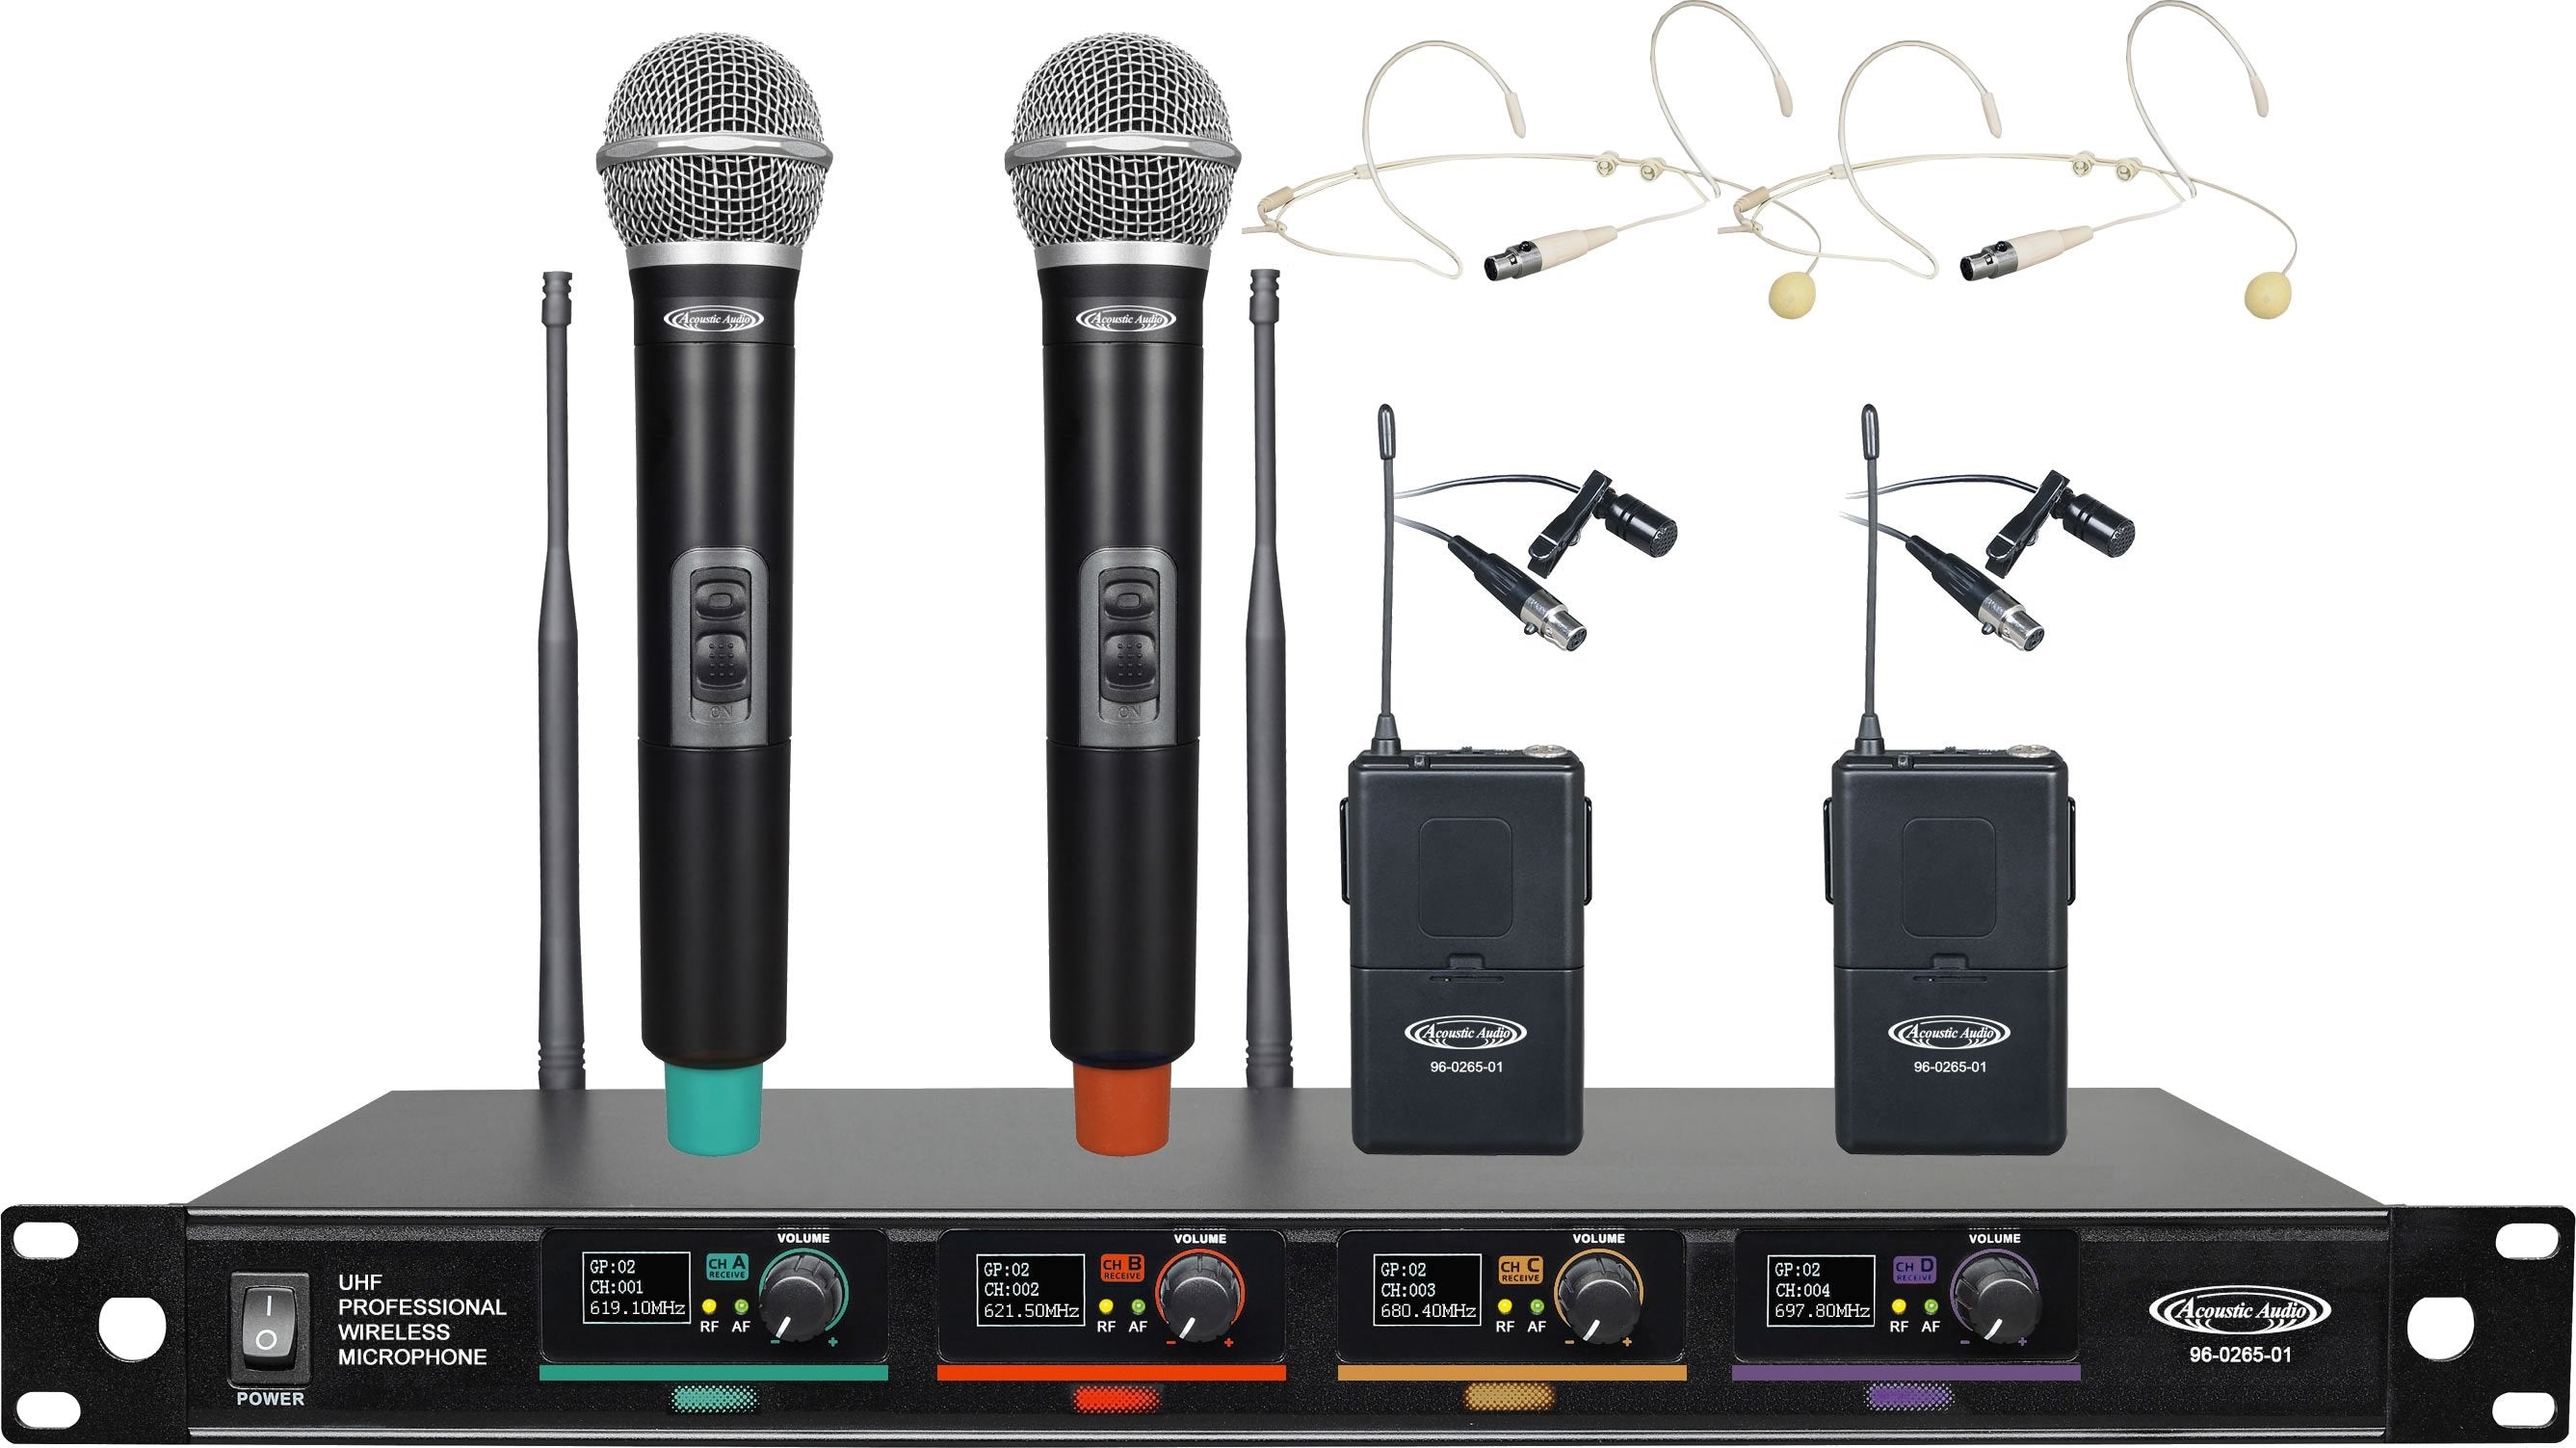 96-0265-01 UHF Professional Wireless Microphone Systems - 2*Wireless Microphones & 2*Headsets